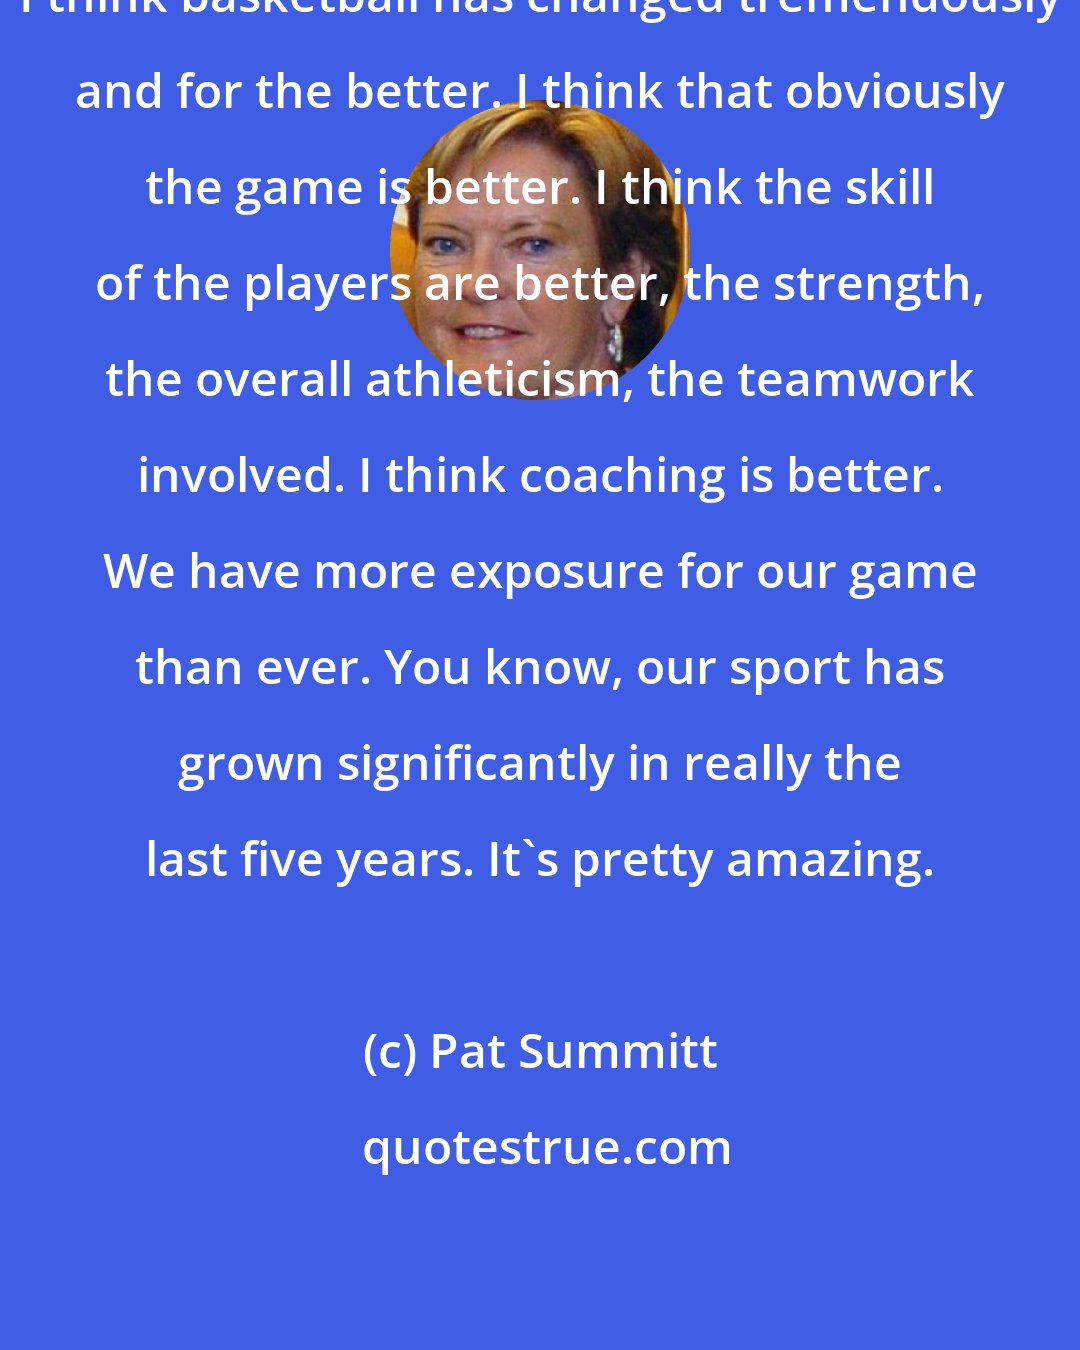 Pat Summitt: I think basketball has changed tremendously and for the better. I think that obviously the game is better. I think the skill of the players are better, the strength, the overall athleticism, the teamwork involved. I think coaching is better. We have more exposure for our game than ever. You know, our sport has grown significantly in really the last five years. It's pretty amazing.